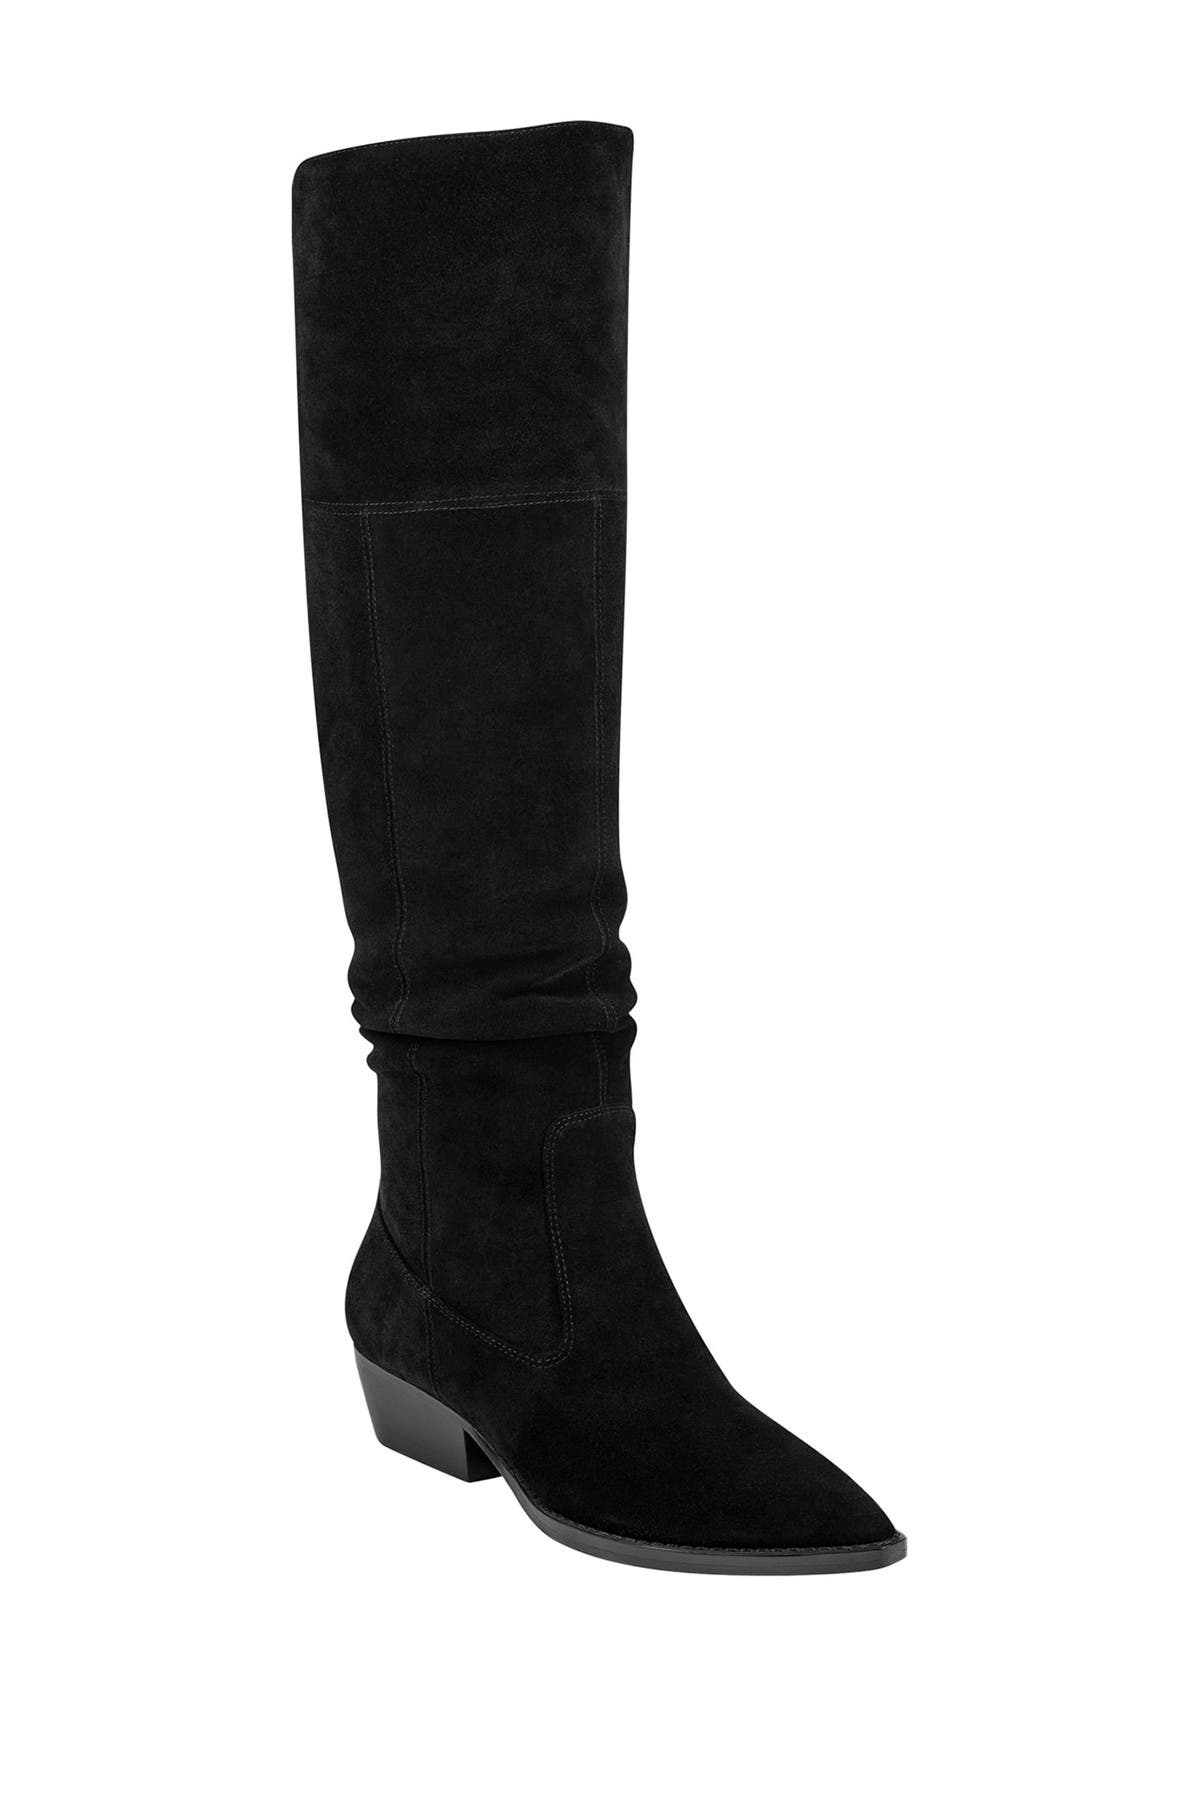 nordstrom marc fisher boots